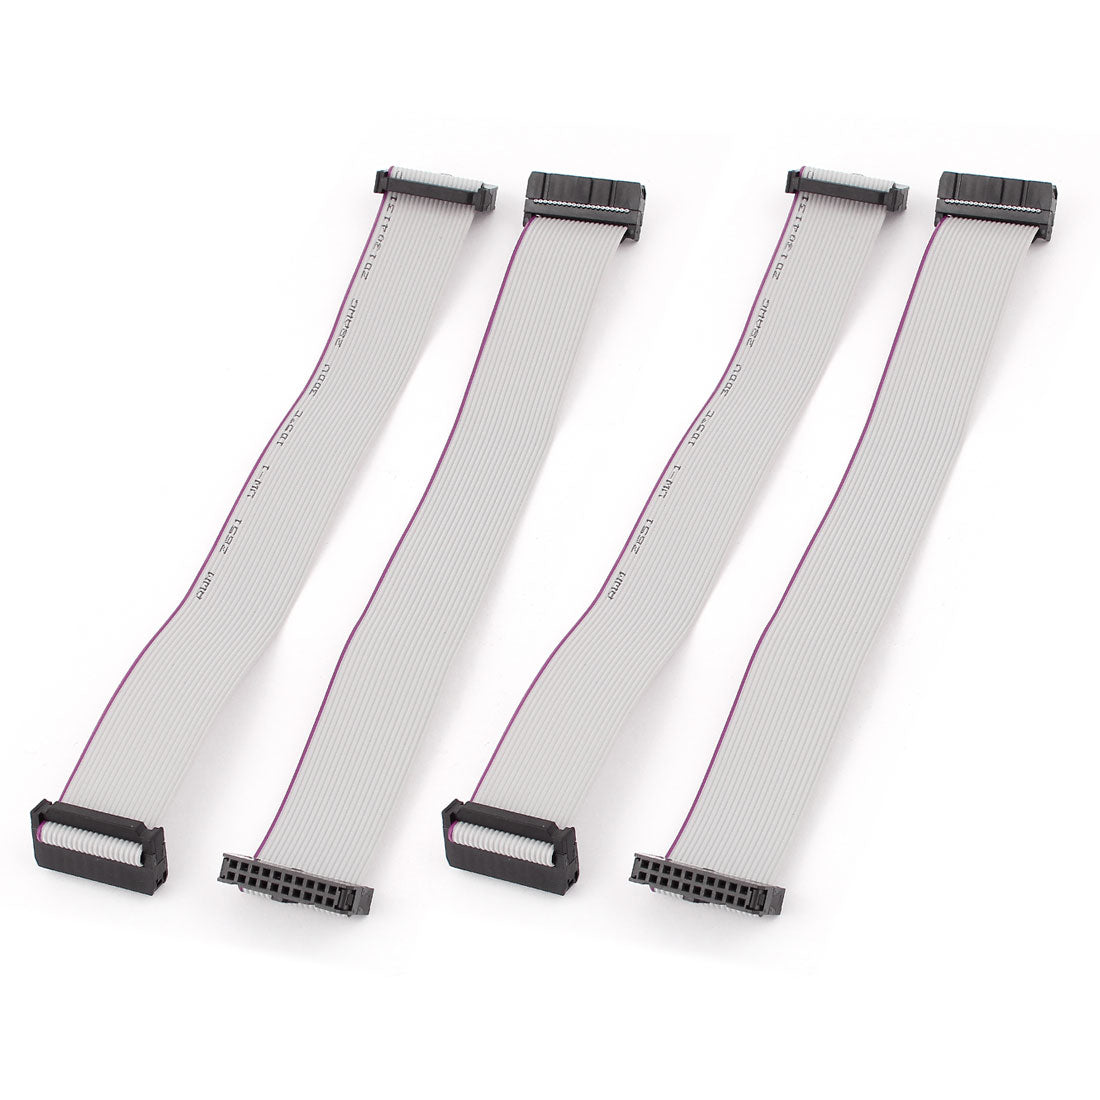 uxcell Uxcell 4pcs IDC 20-Pin Hard Drive Data Flat Ribbon Cable Extension Wire Female Connector 20cm Long for Motherboard